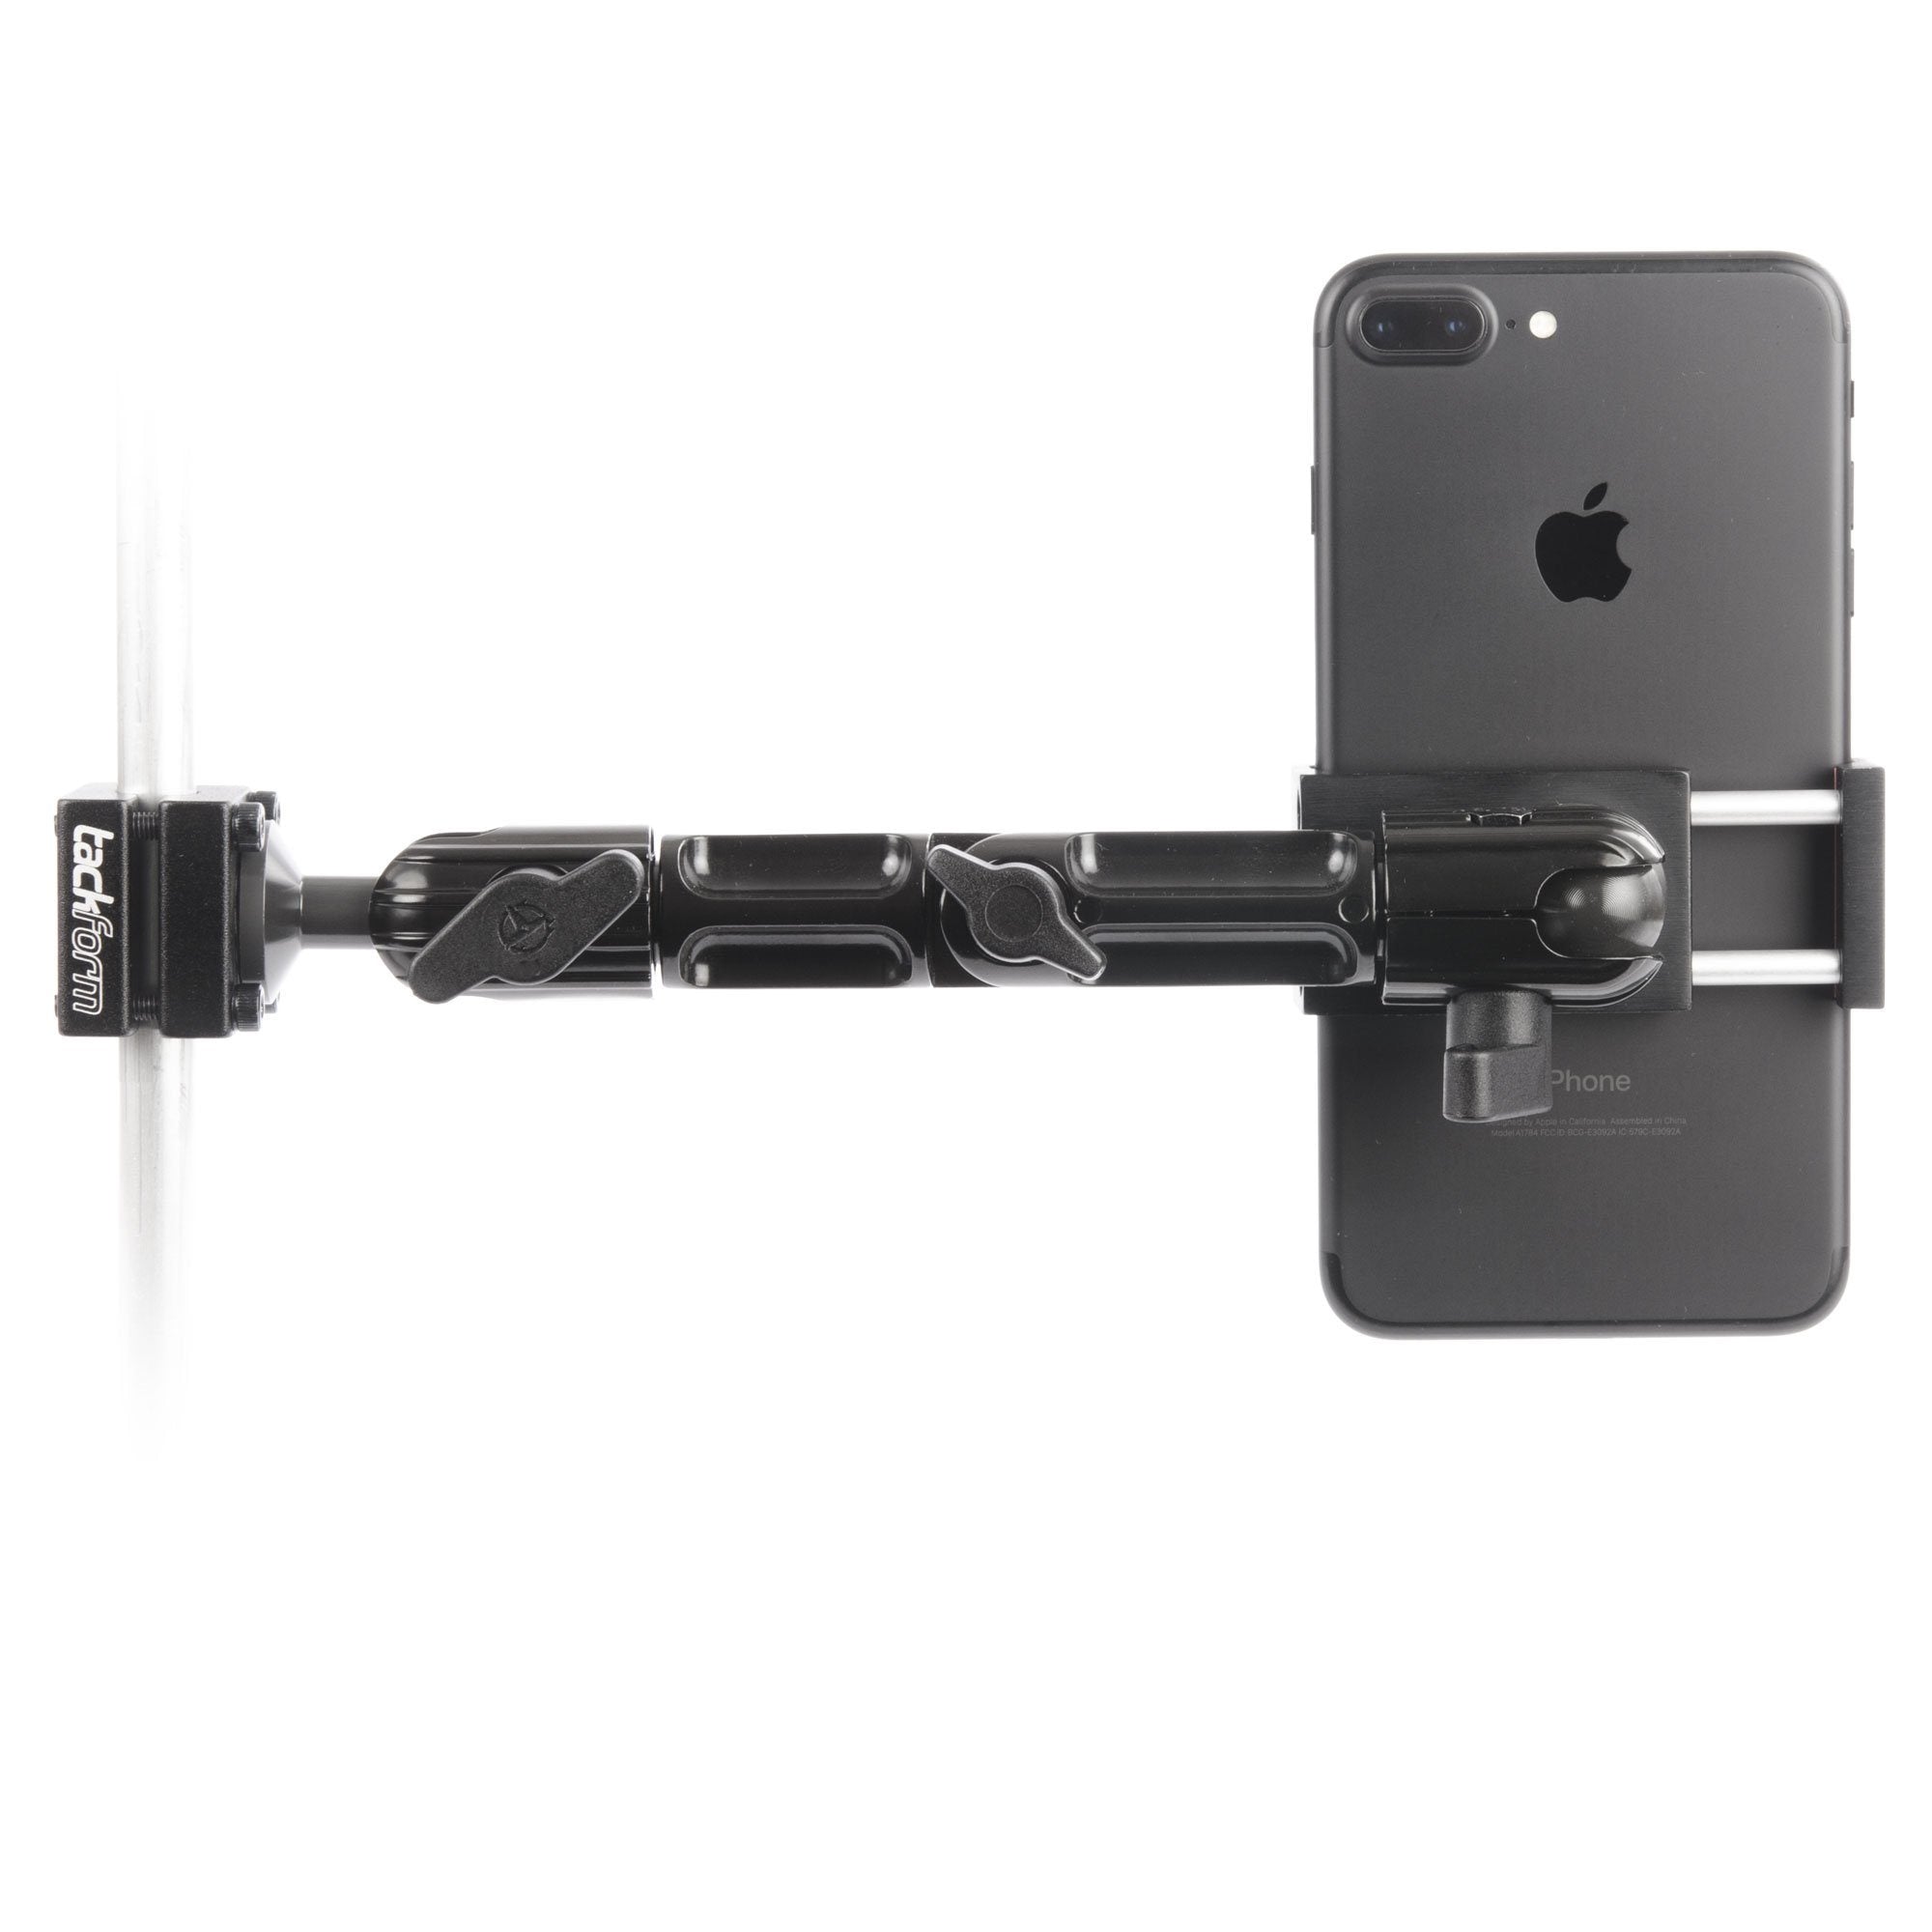 Headrest Mount for iPhone Galaxy and other phones